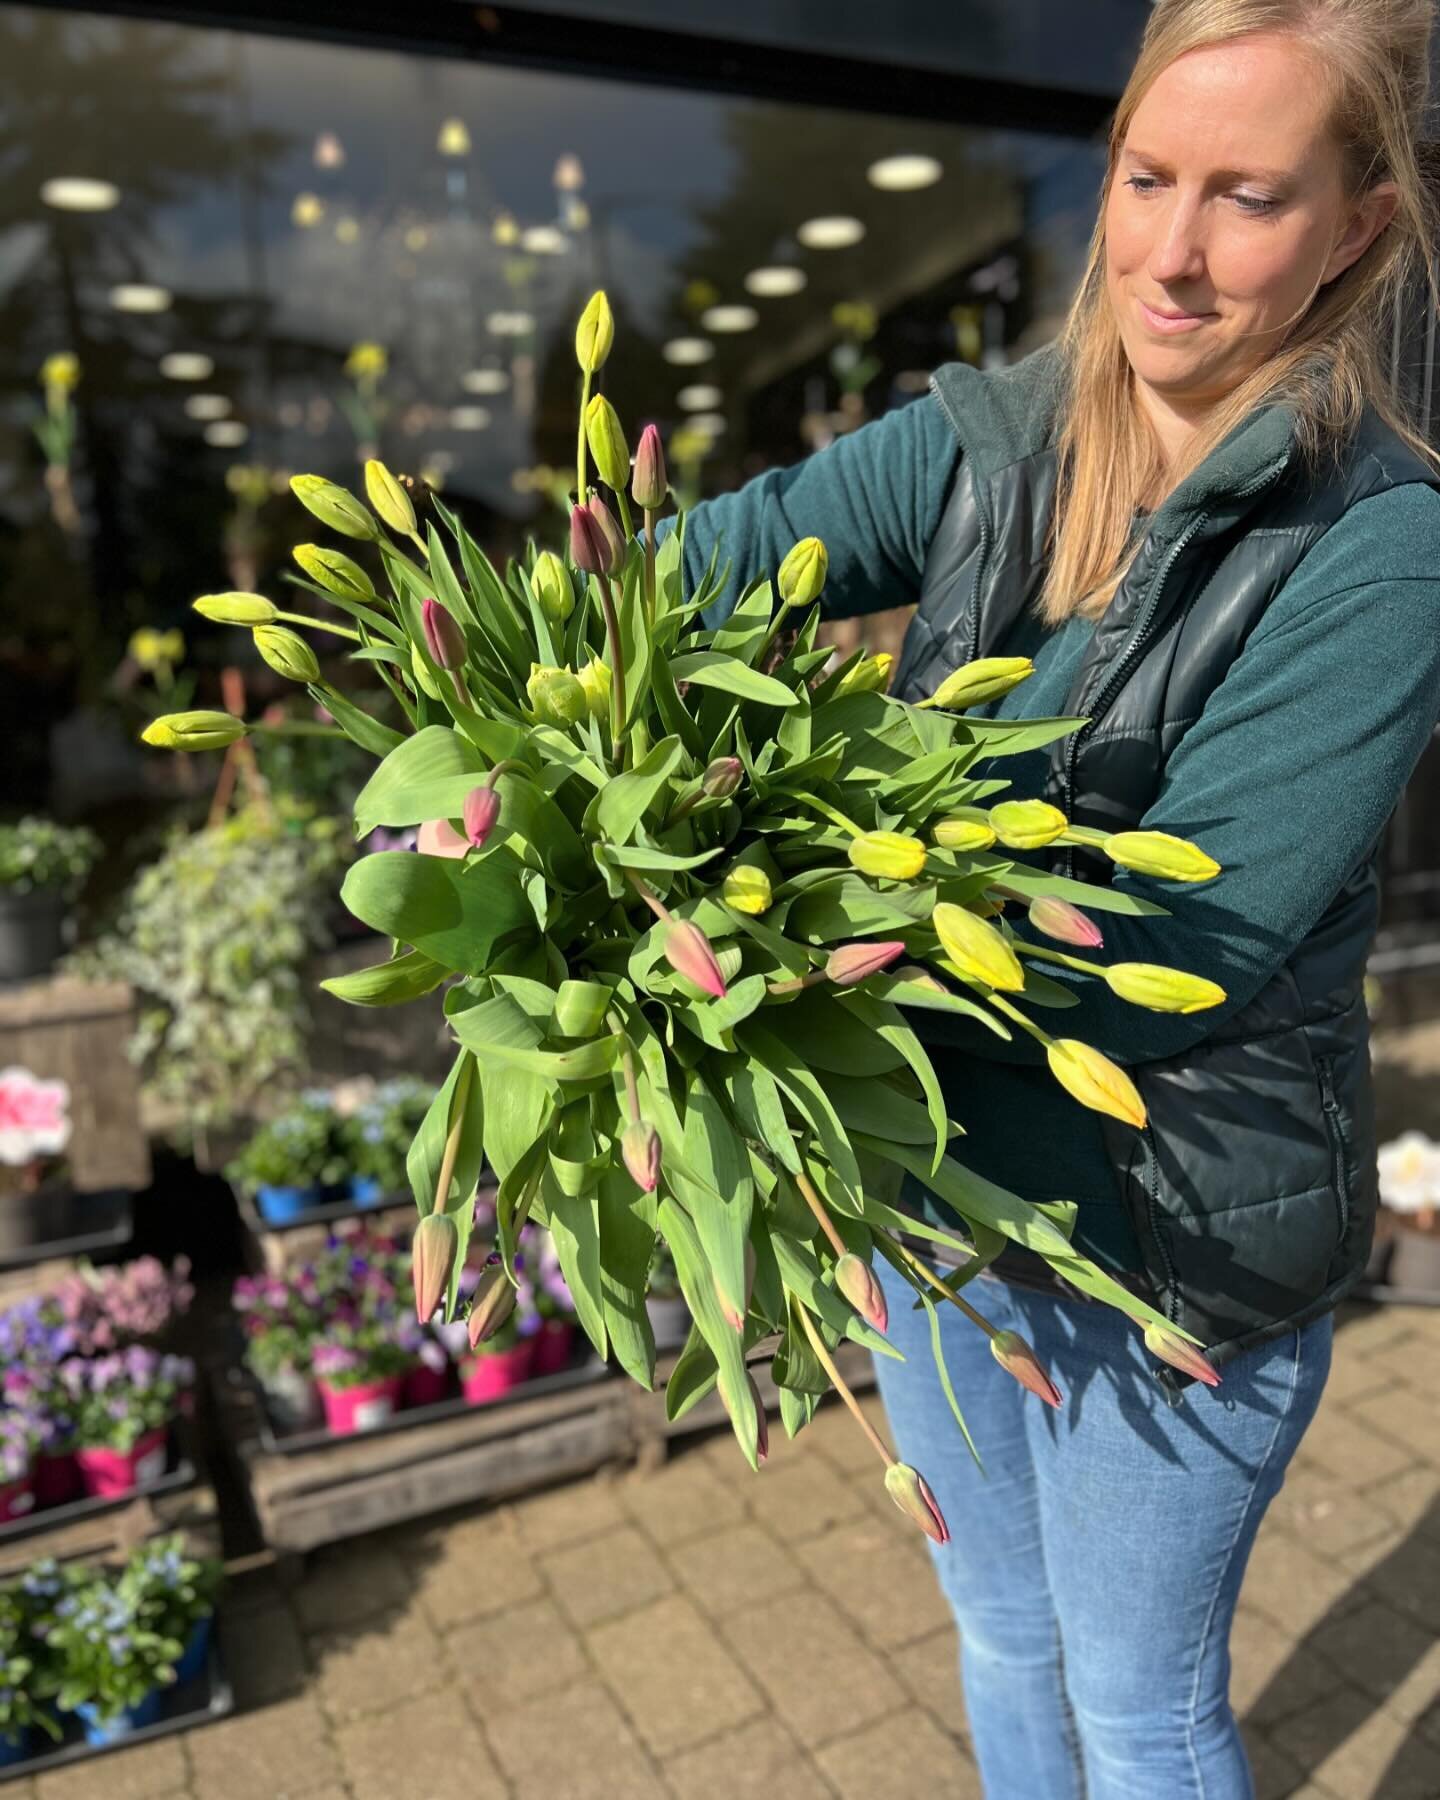 The sun is shining and our shop grown tulips are starting to fill the shop 🌷🫶

We&rsquo;re open 9-4pm and would love to see you!

#littlechalfont #tulips #freshflowers #locallygrown #shoplocal #springflowers